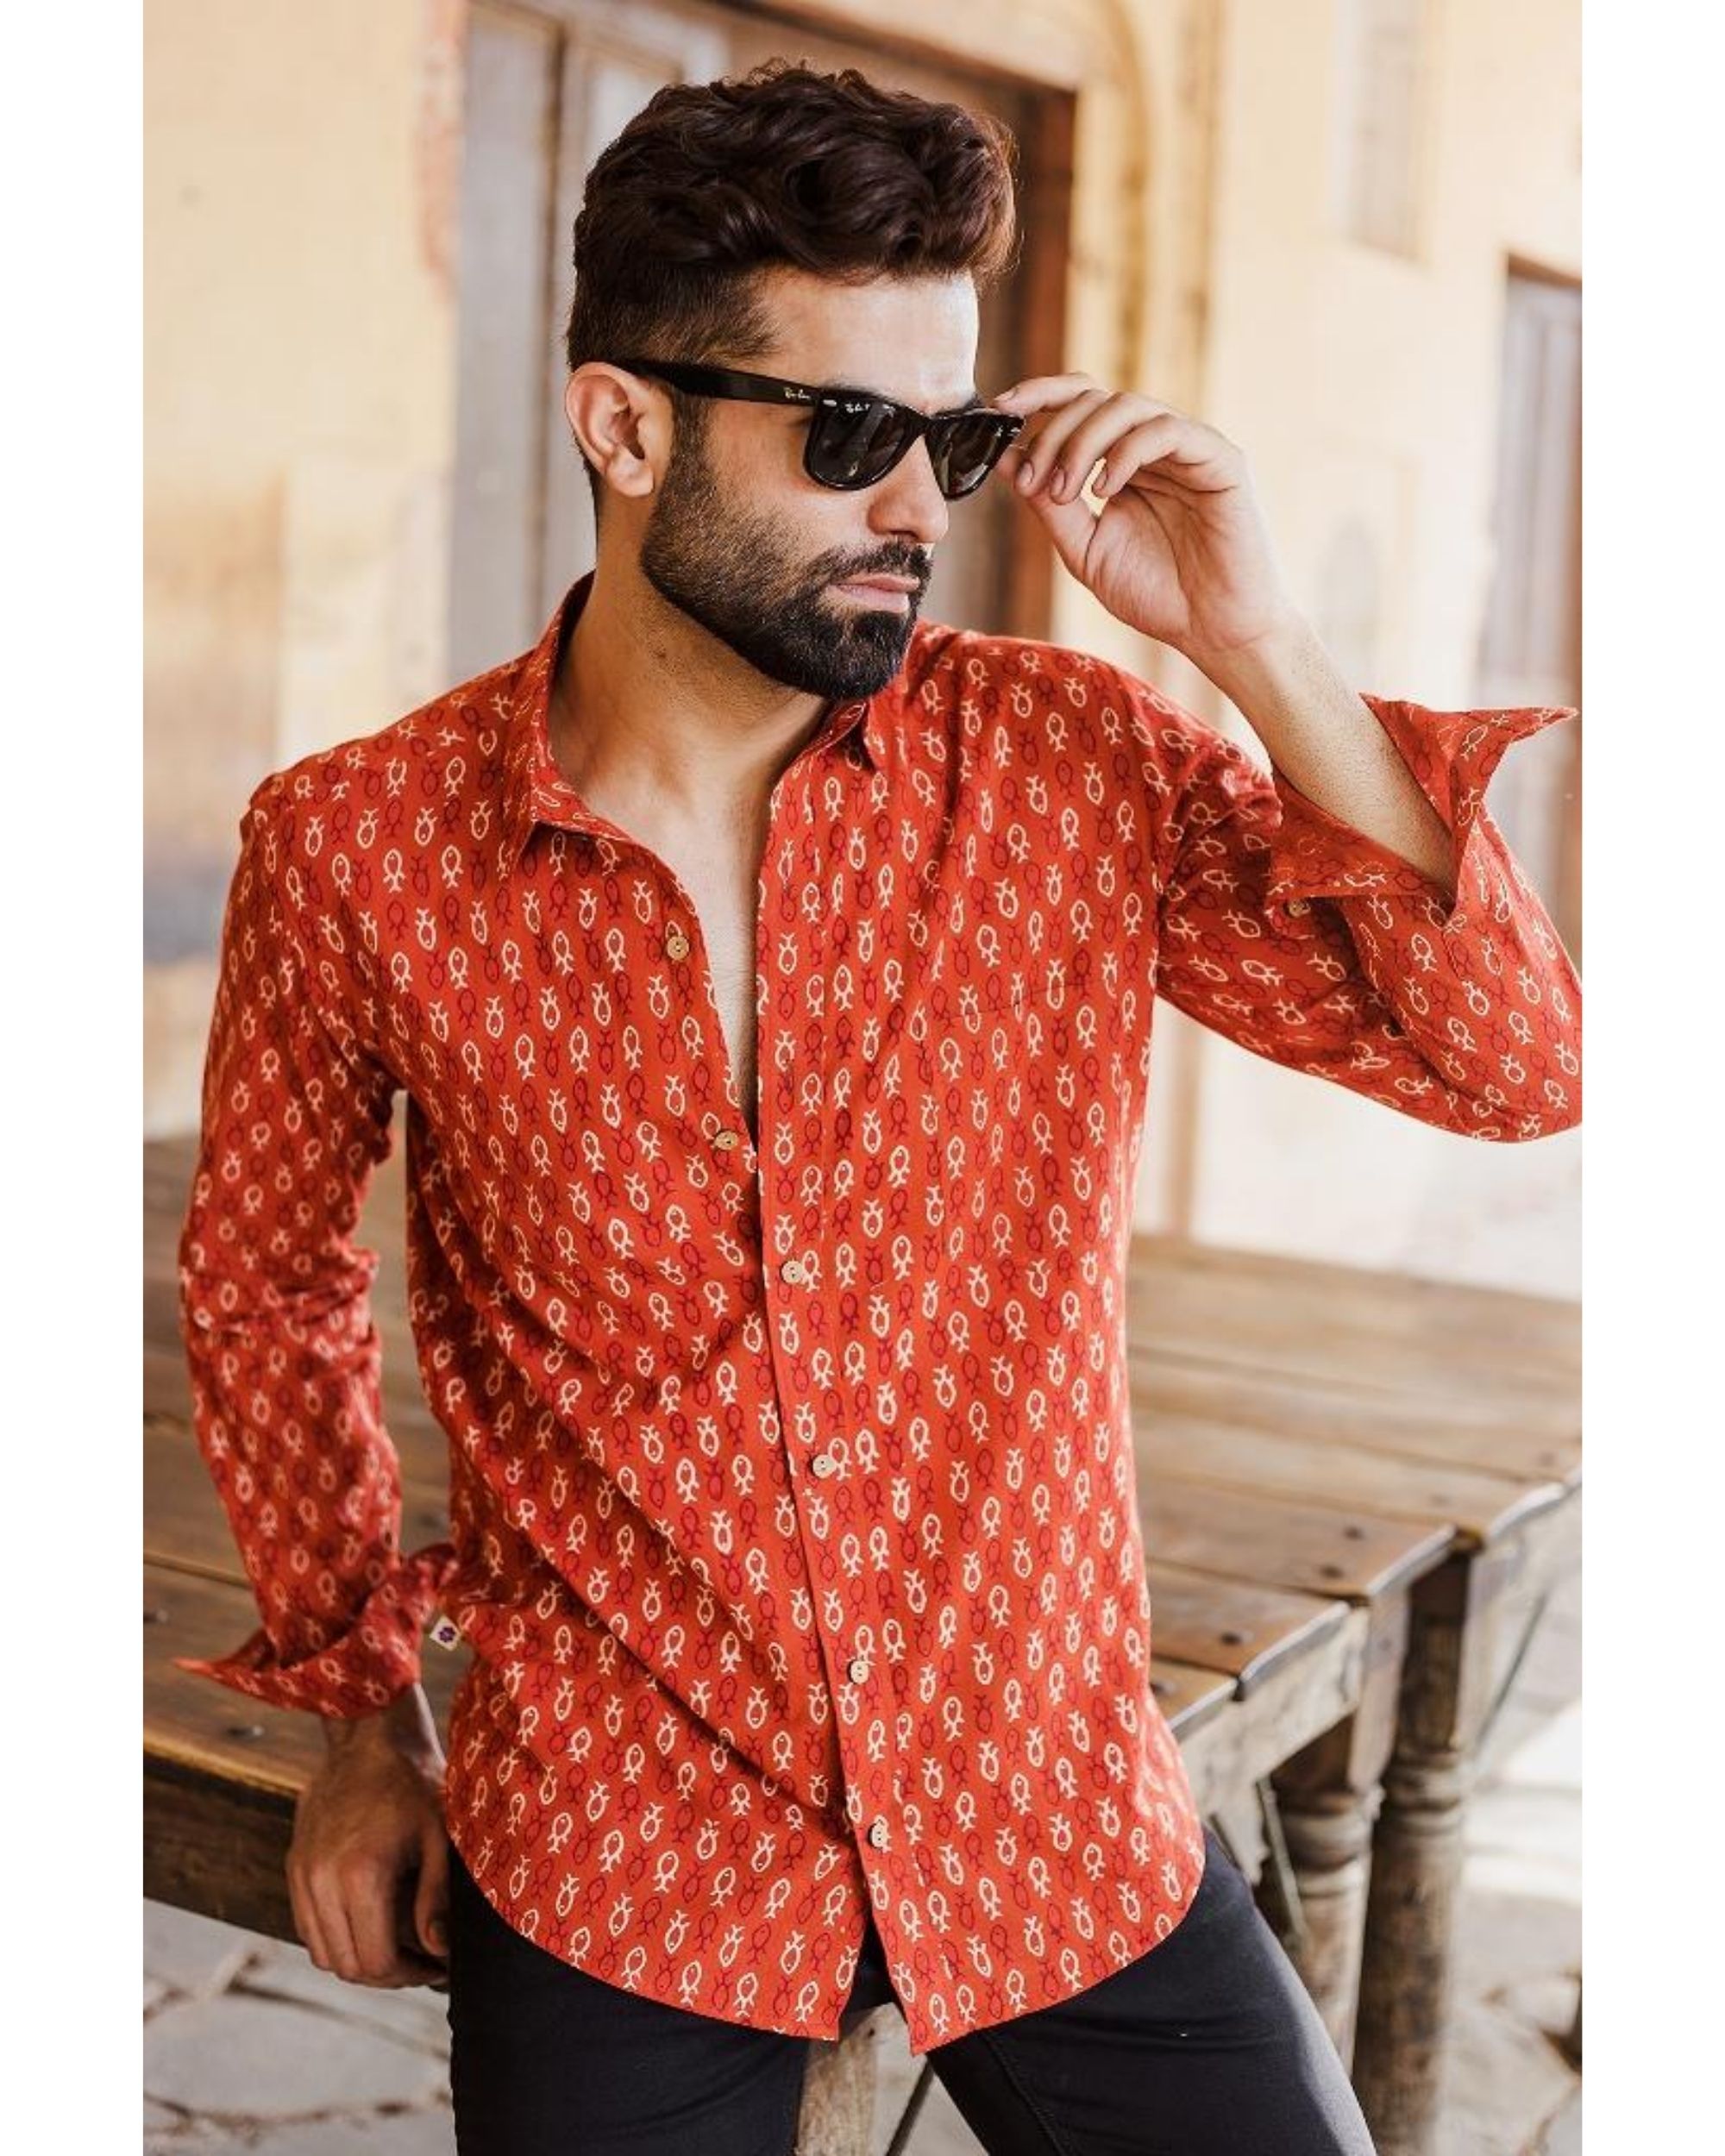 Red fish printed shirt by Prints Valley